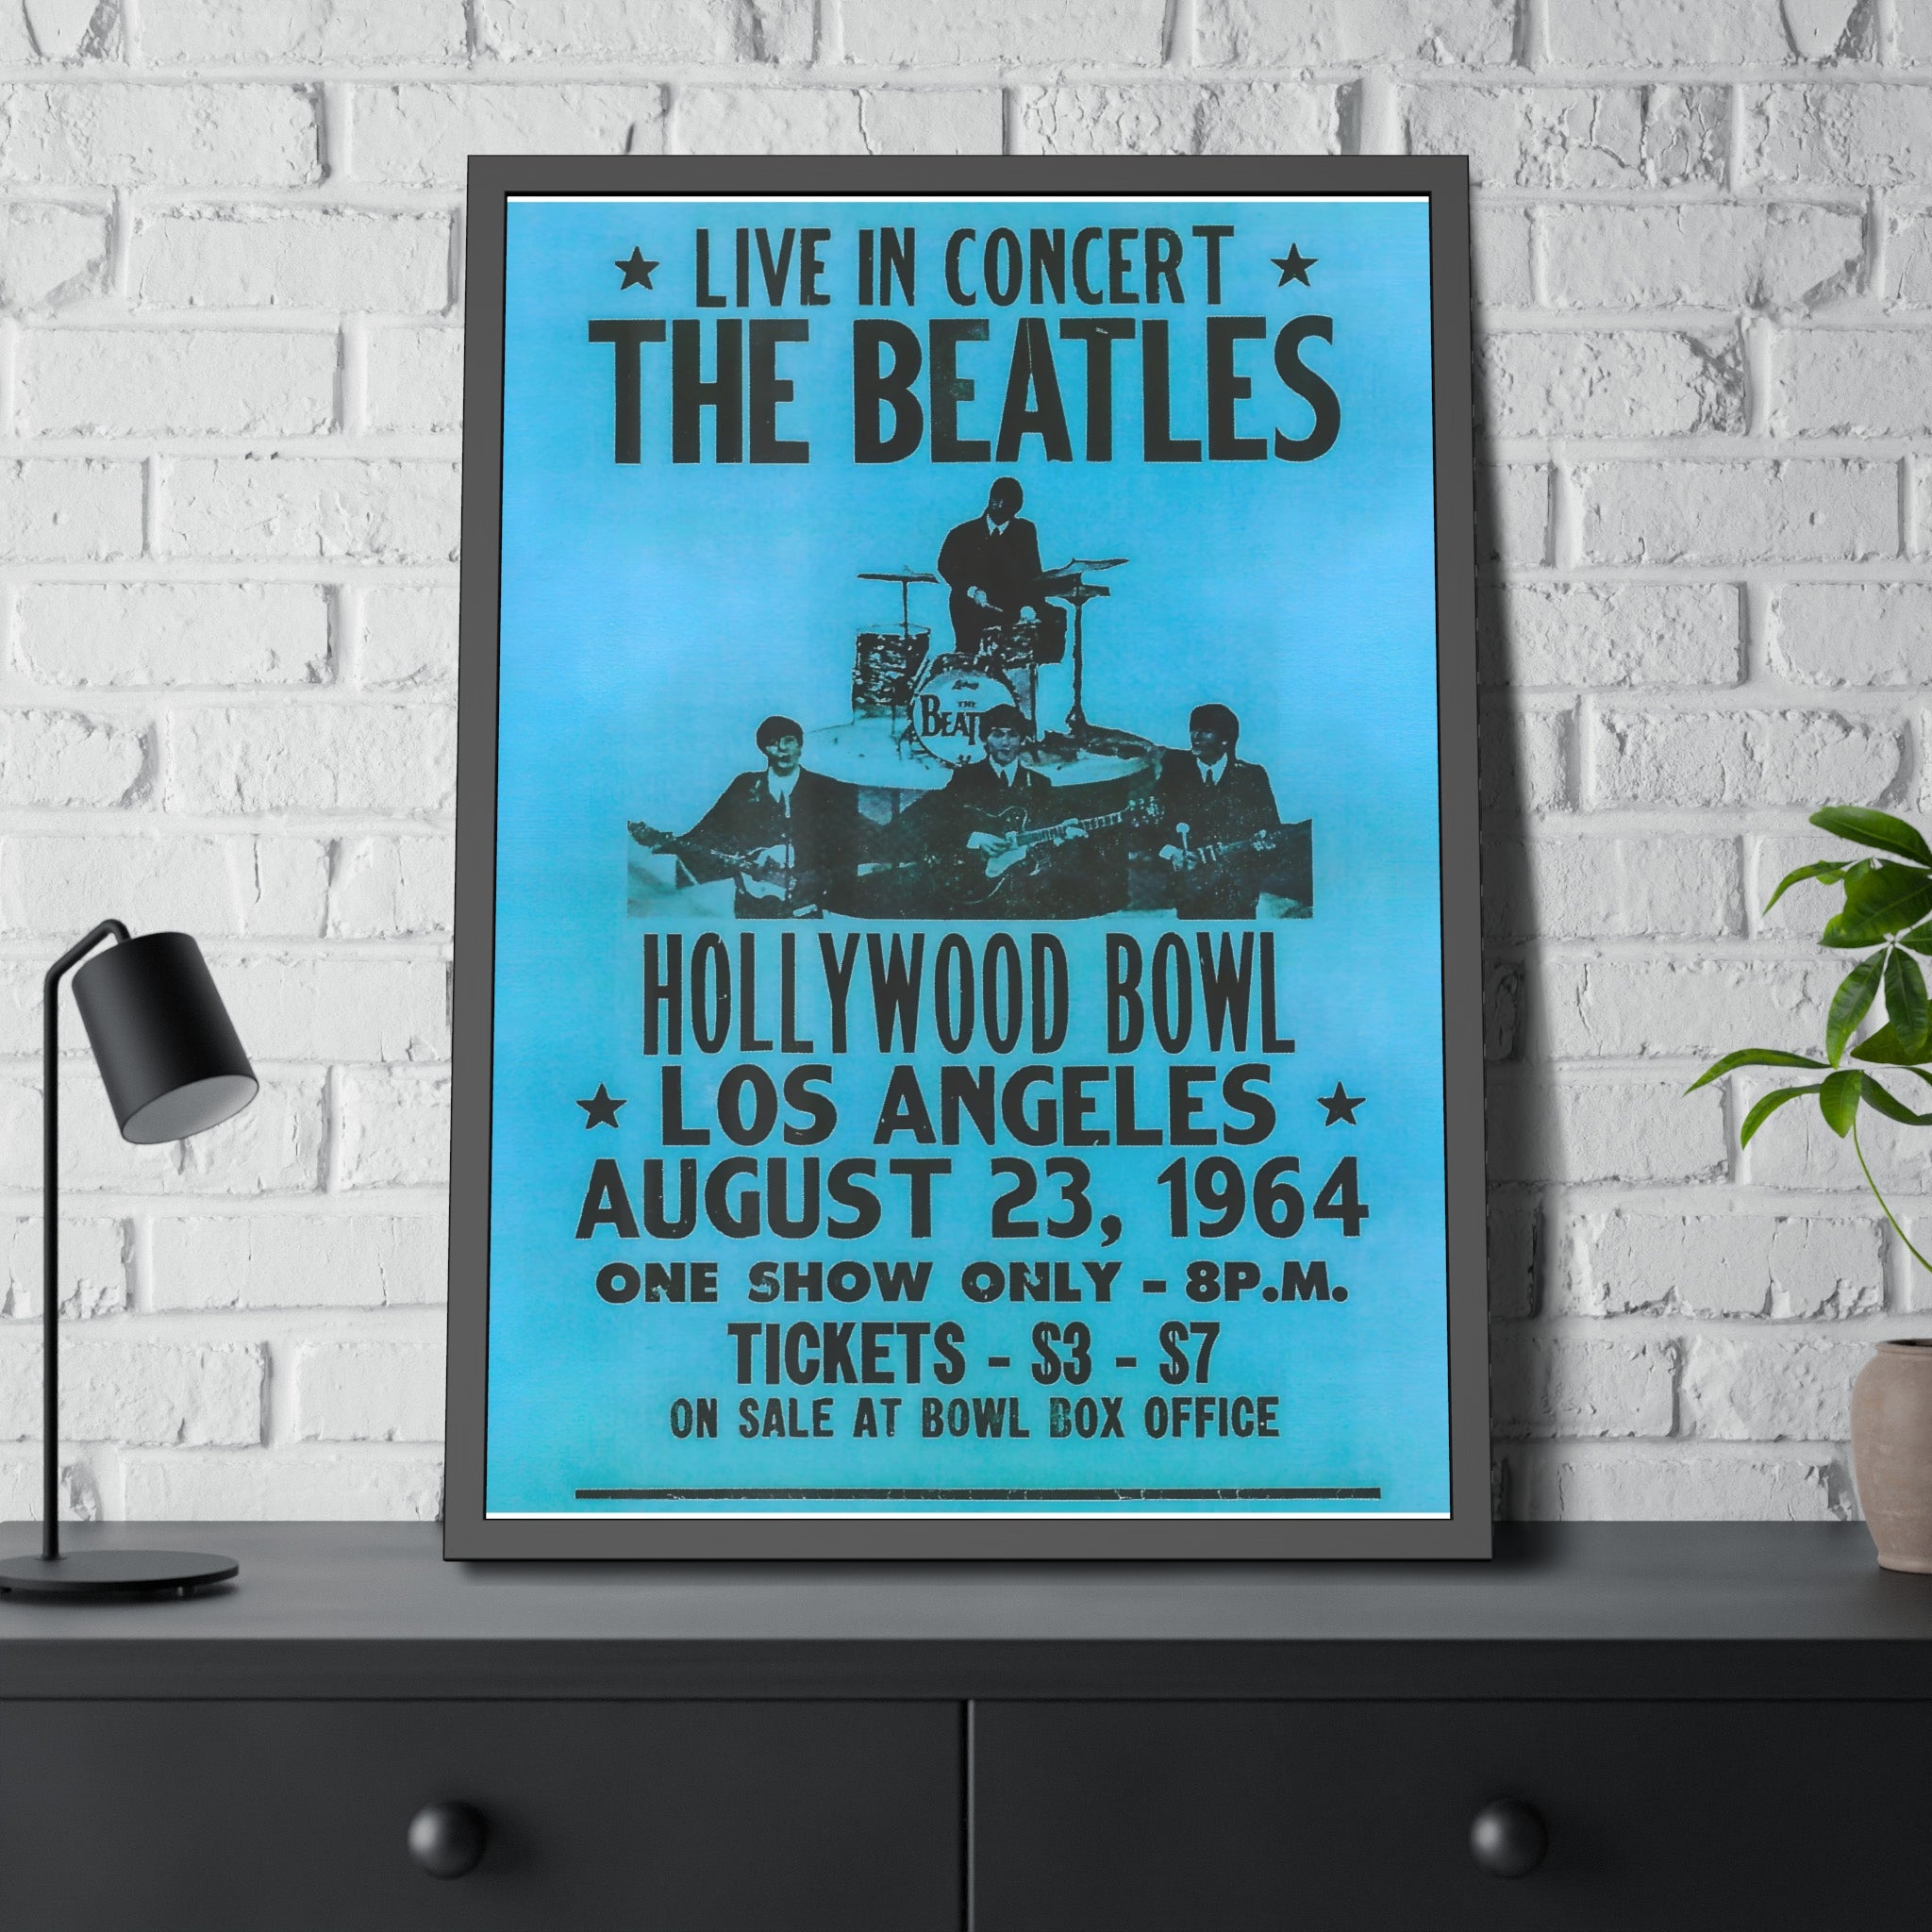 The Beatles Hollywood Bowl Concert Poster